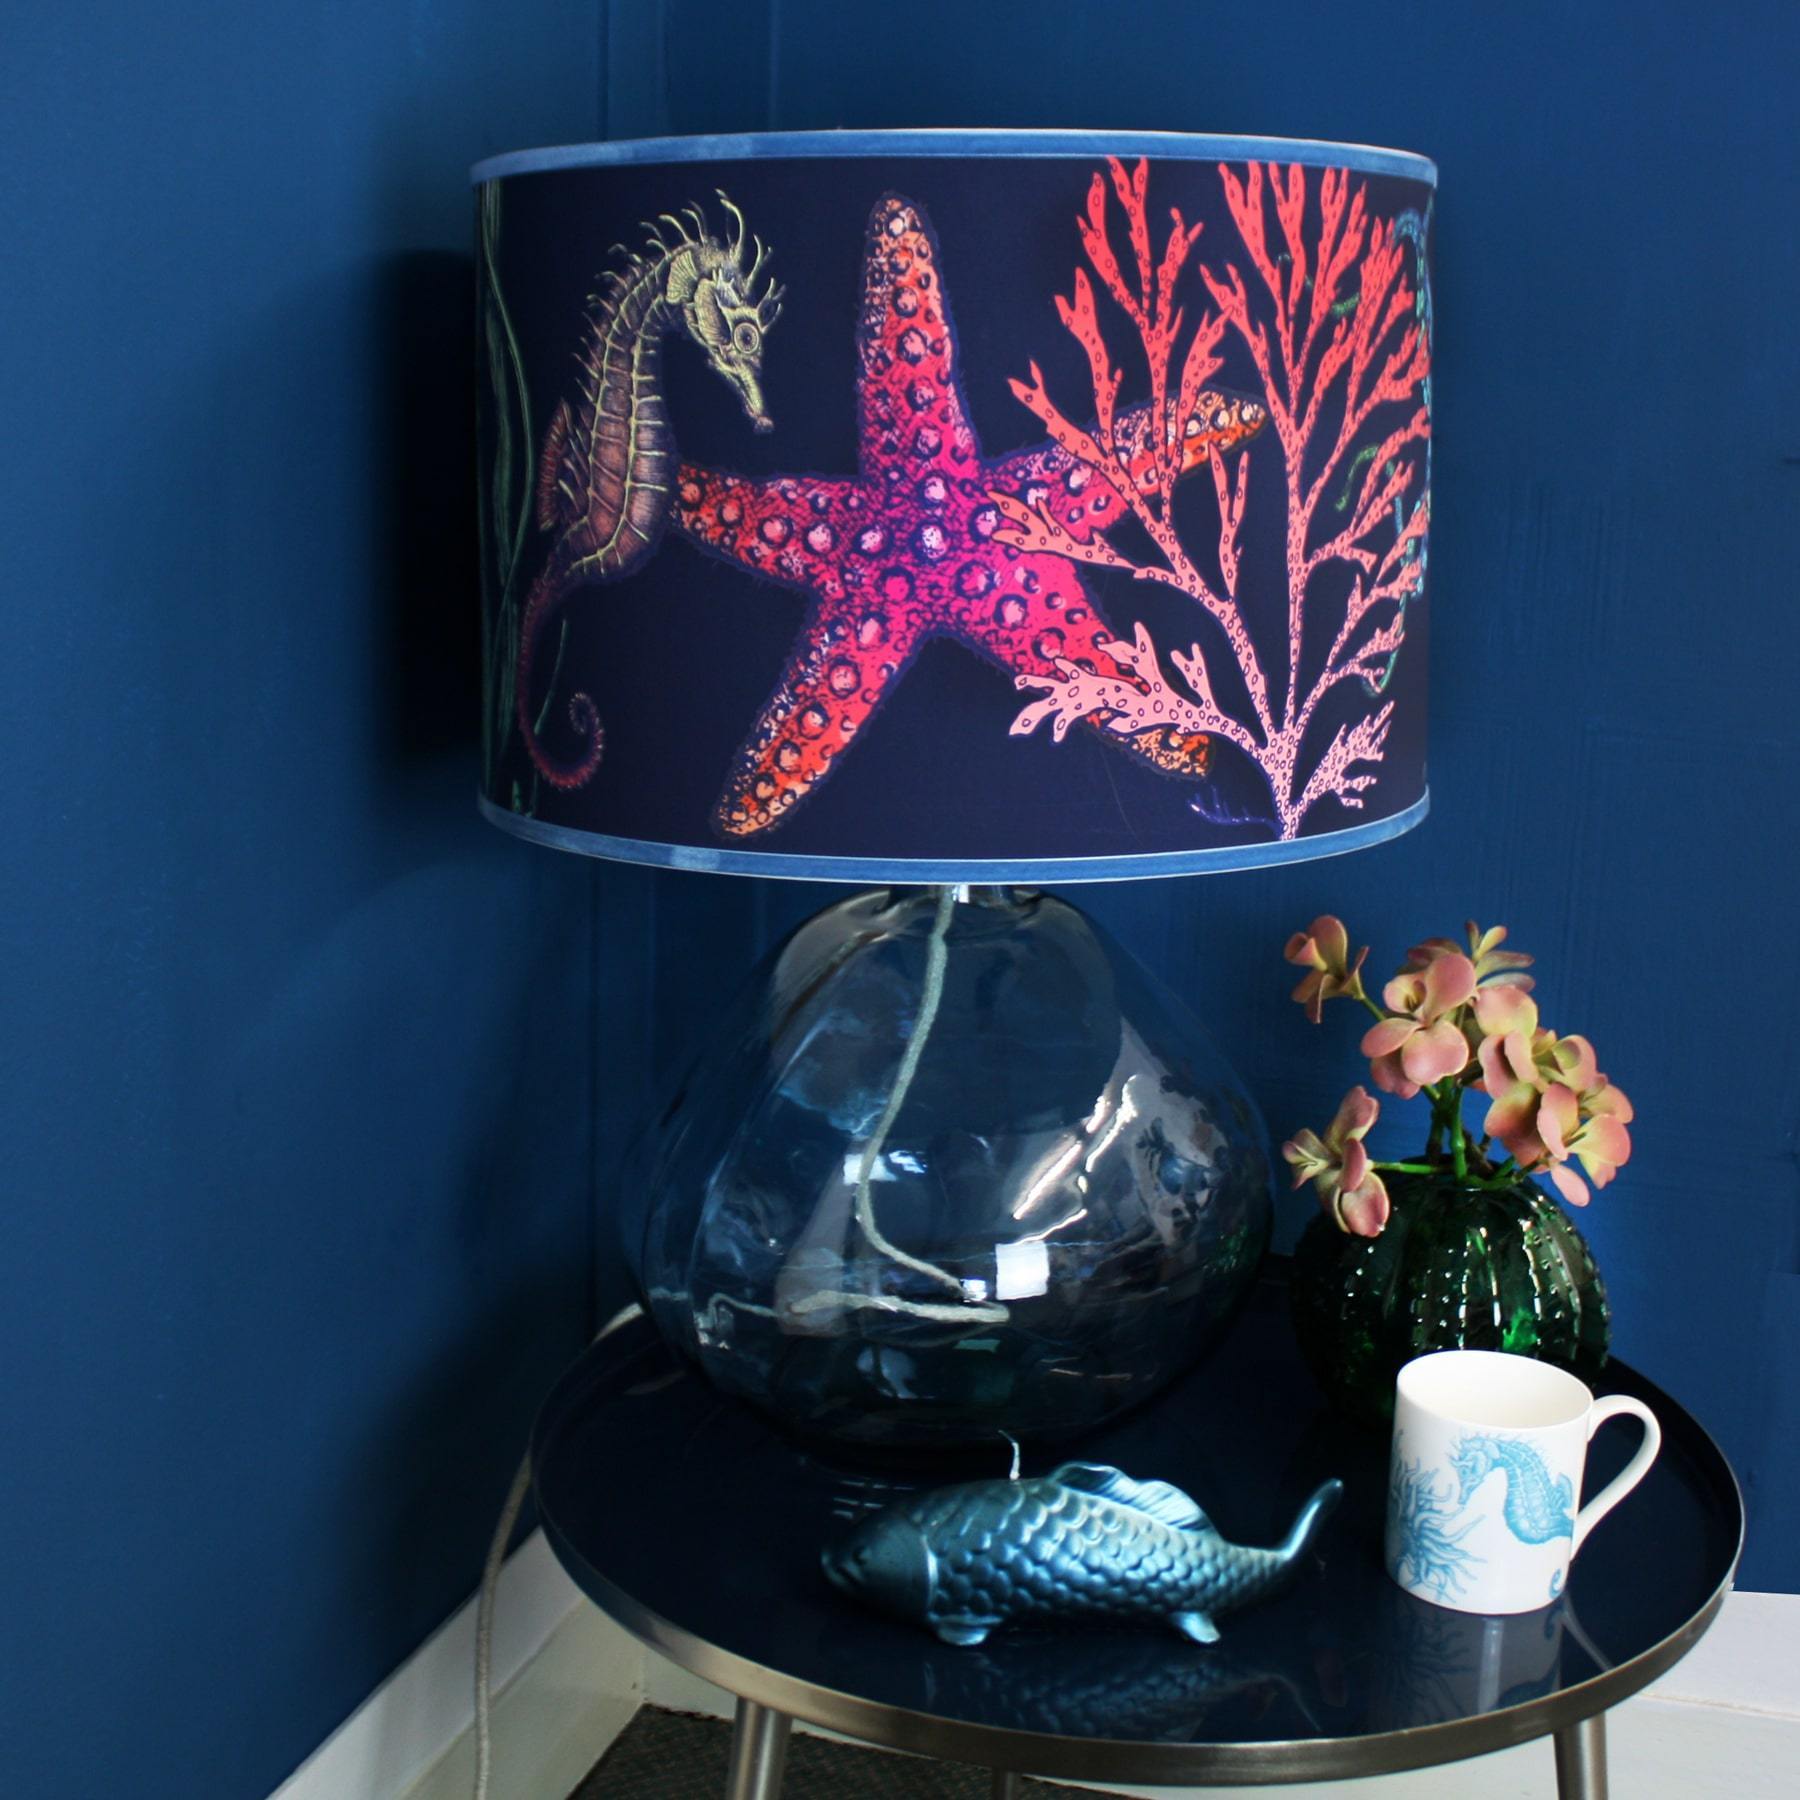 Rainbow Reef Navy Shade With Octopus,Seahorse,Starfish and Seaweed Design in bright colours on a blue glass lampshade placed on a side table with a fish candle,mug and a vase with flowers.